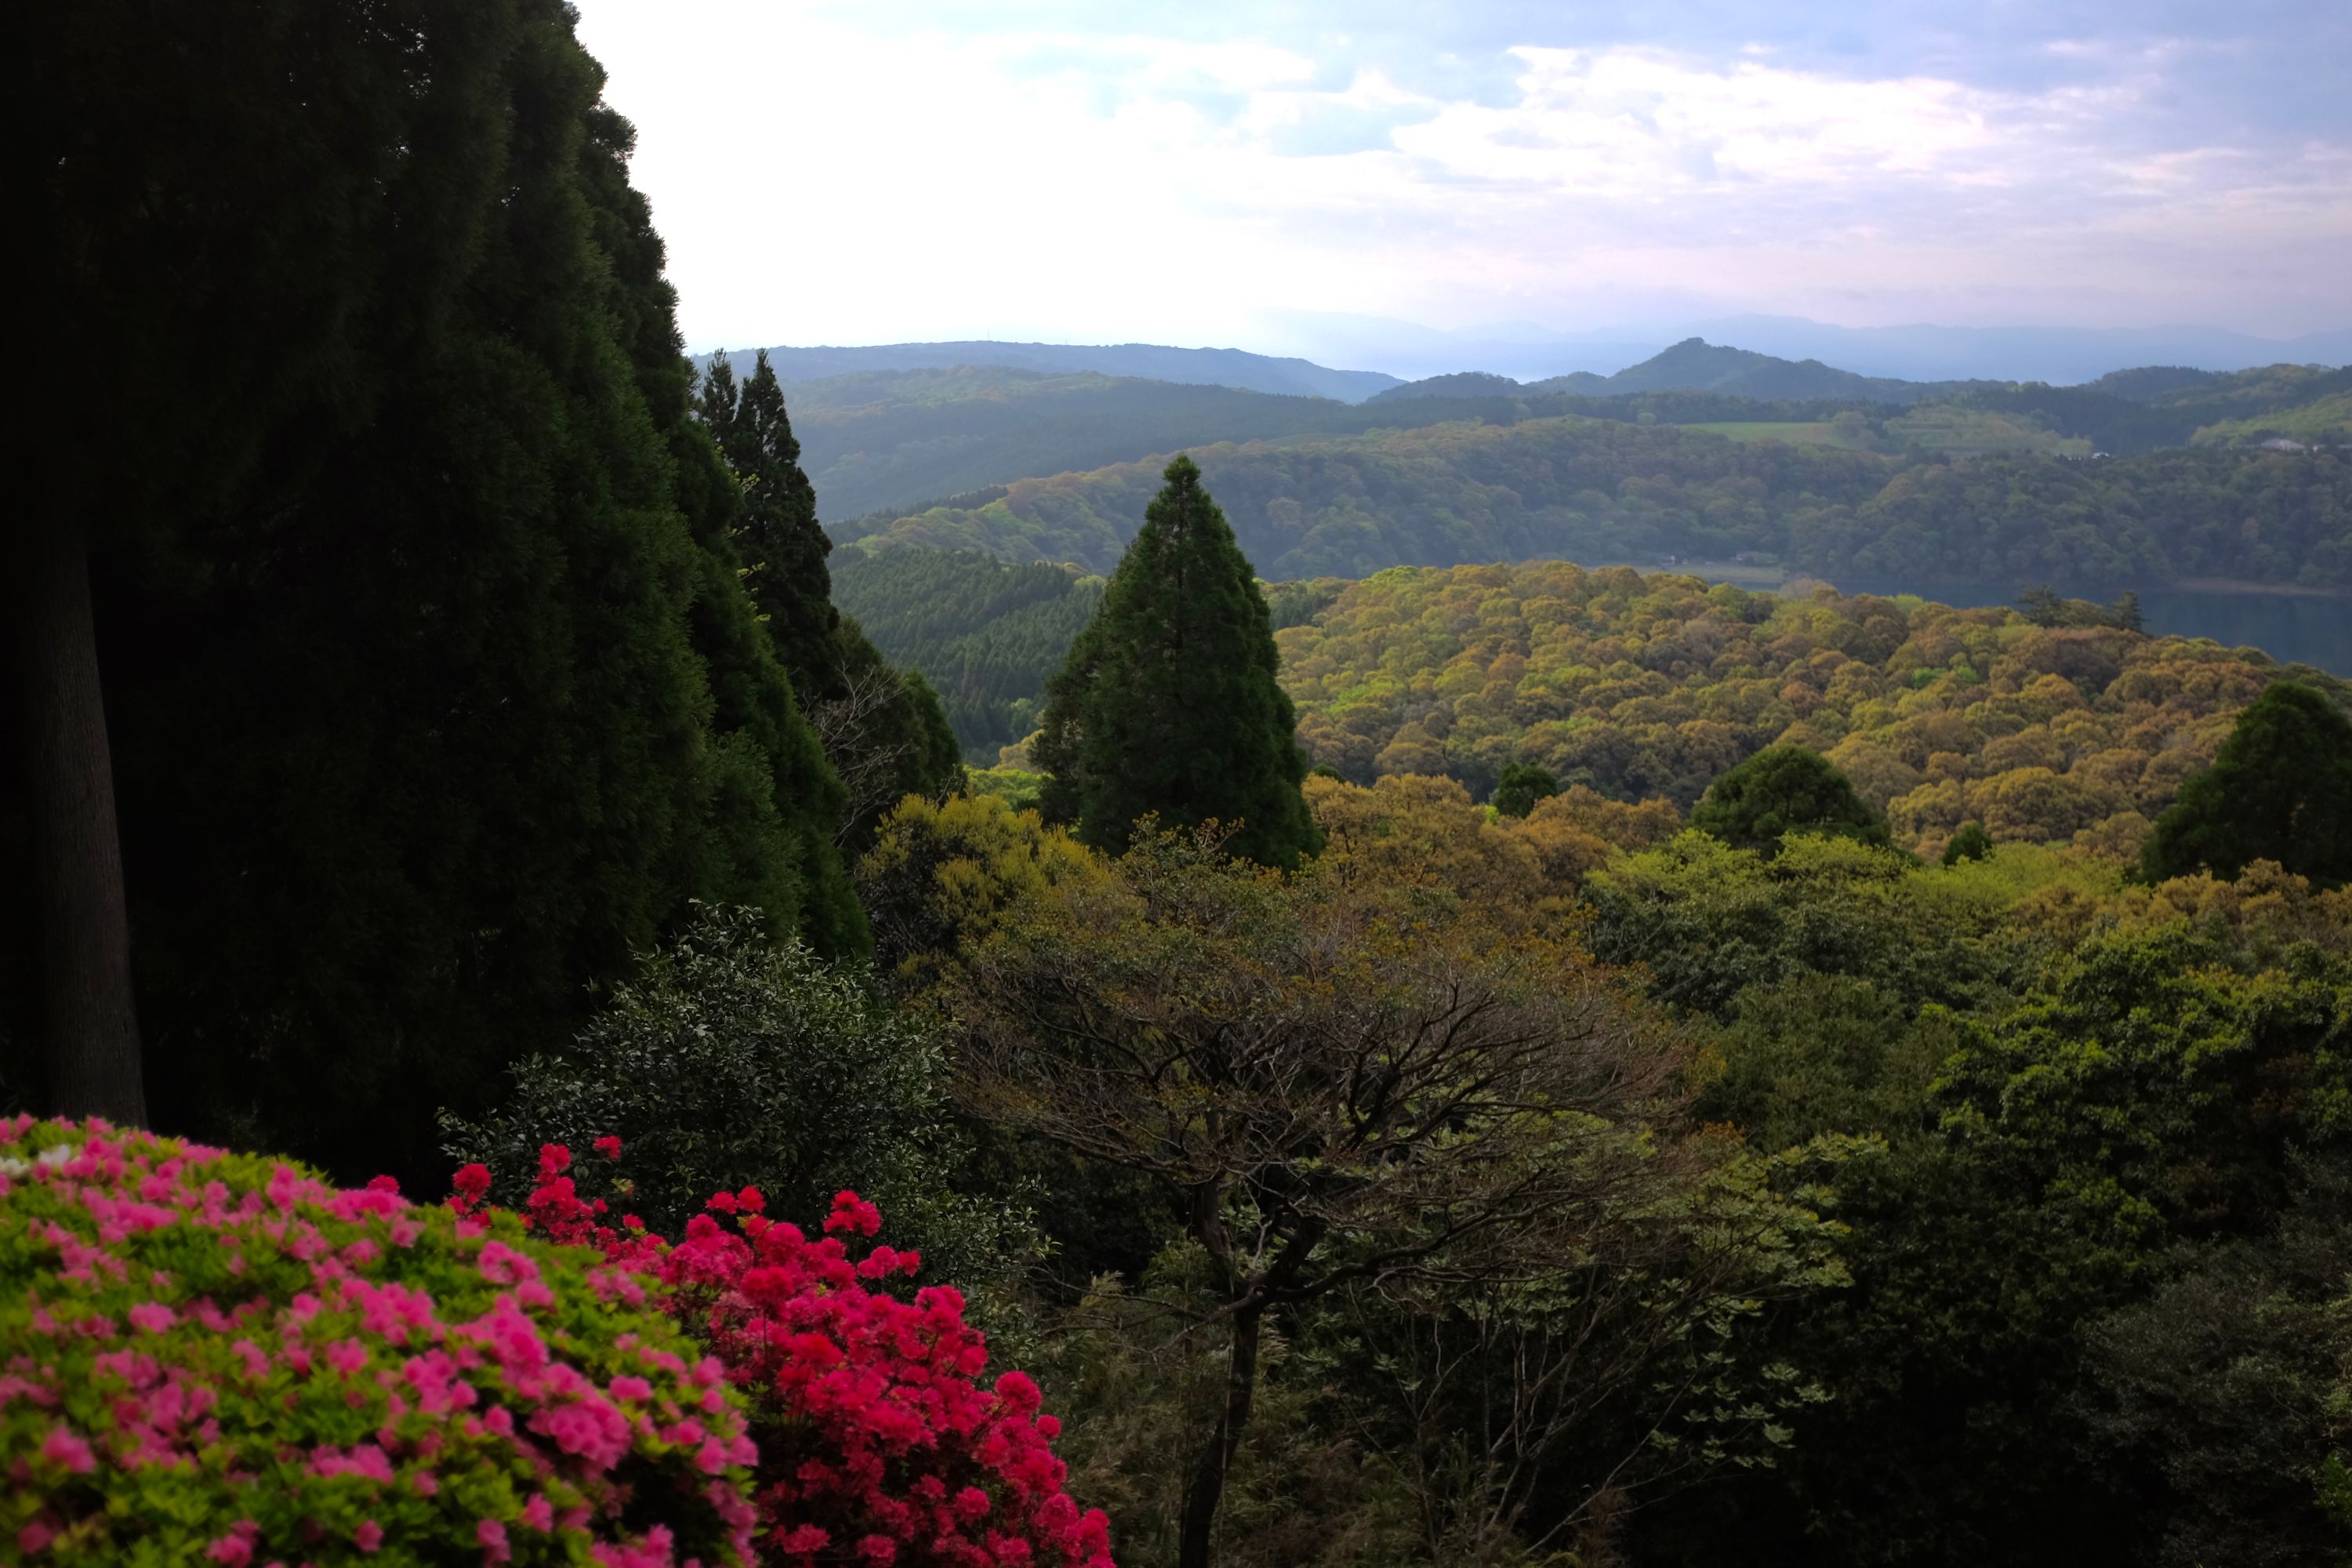 A landscape of rolling hills and a round lake, Lake Miike, behind blooming pink azaleas.